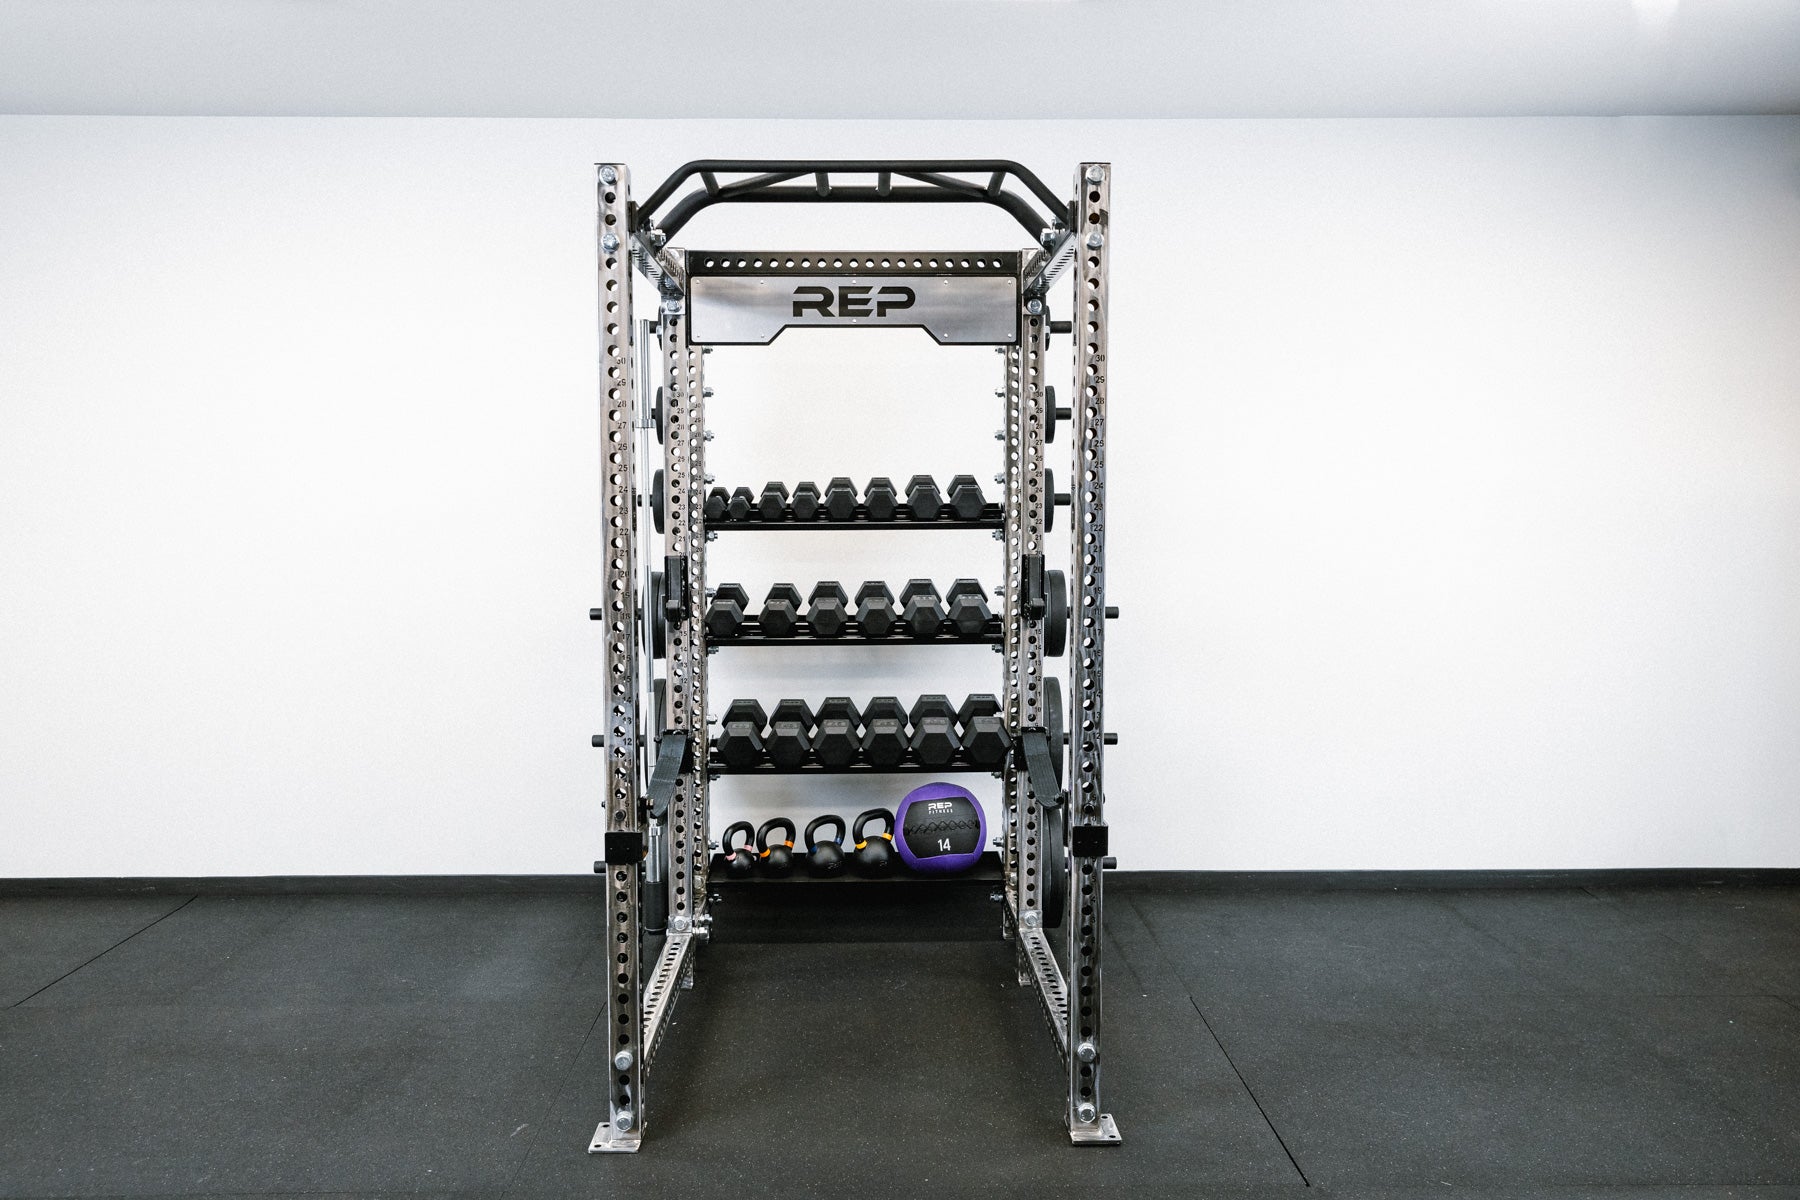 In-Rack Storage With Dumbbell Storage Shelf and Flat Storage Shelf - Storing dumbbells, kettlebell, and Medicine ball